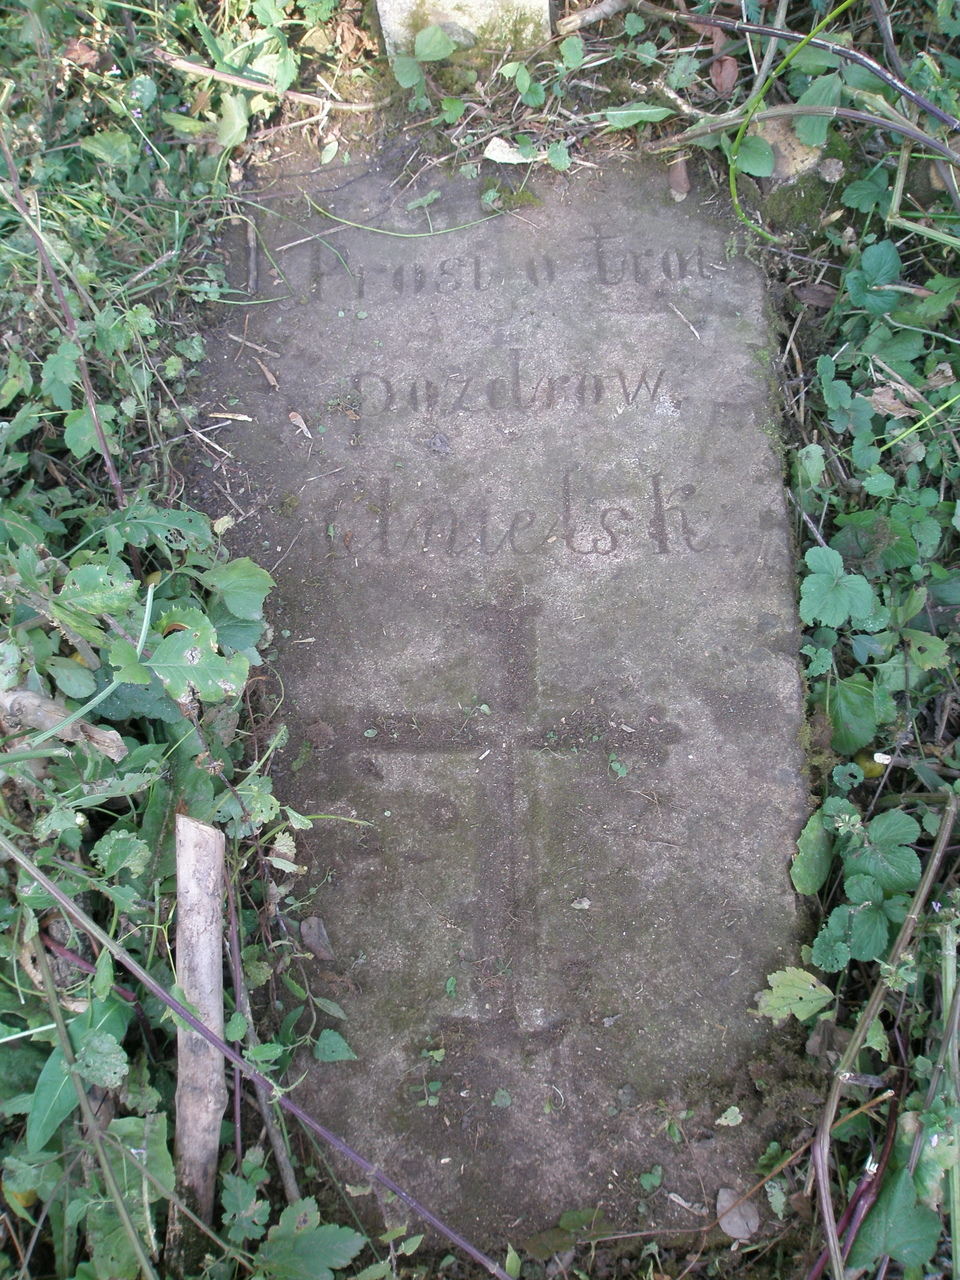 Tombstone of [...] [...]siewicz, Fatty cemetery, as of 2008